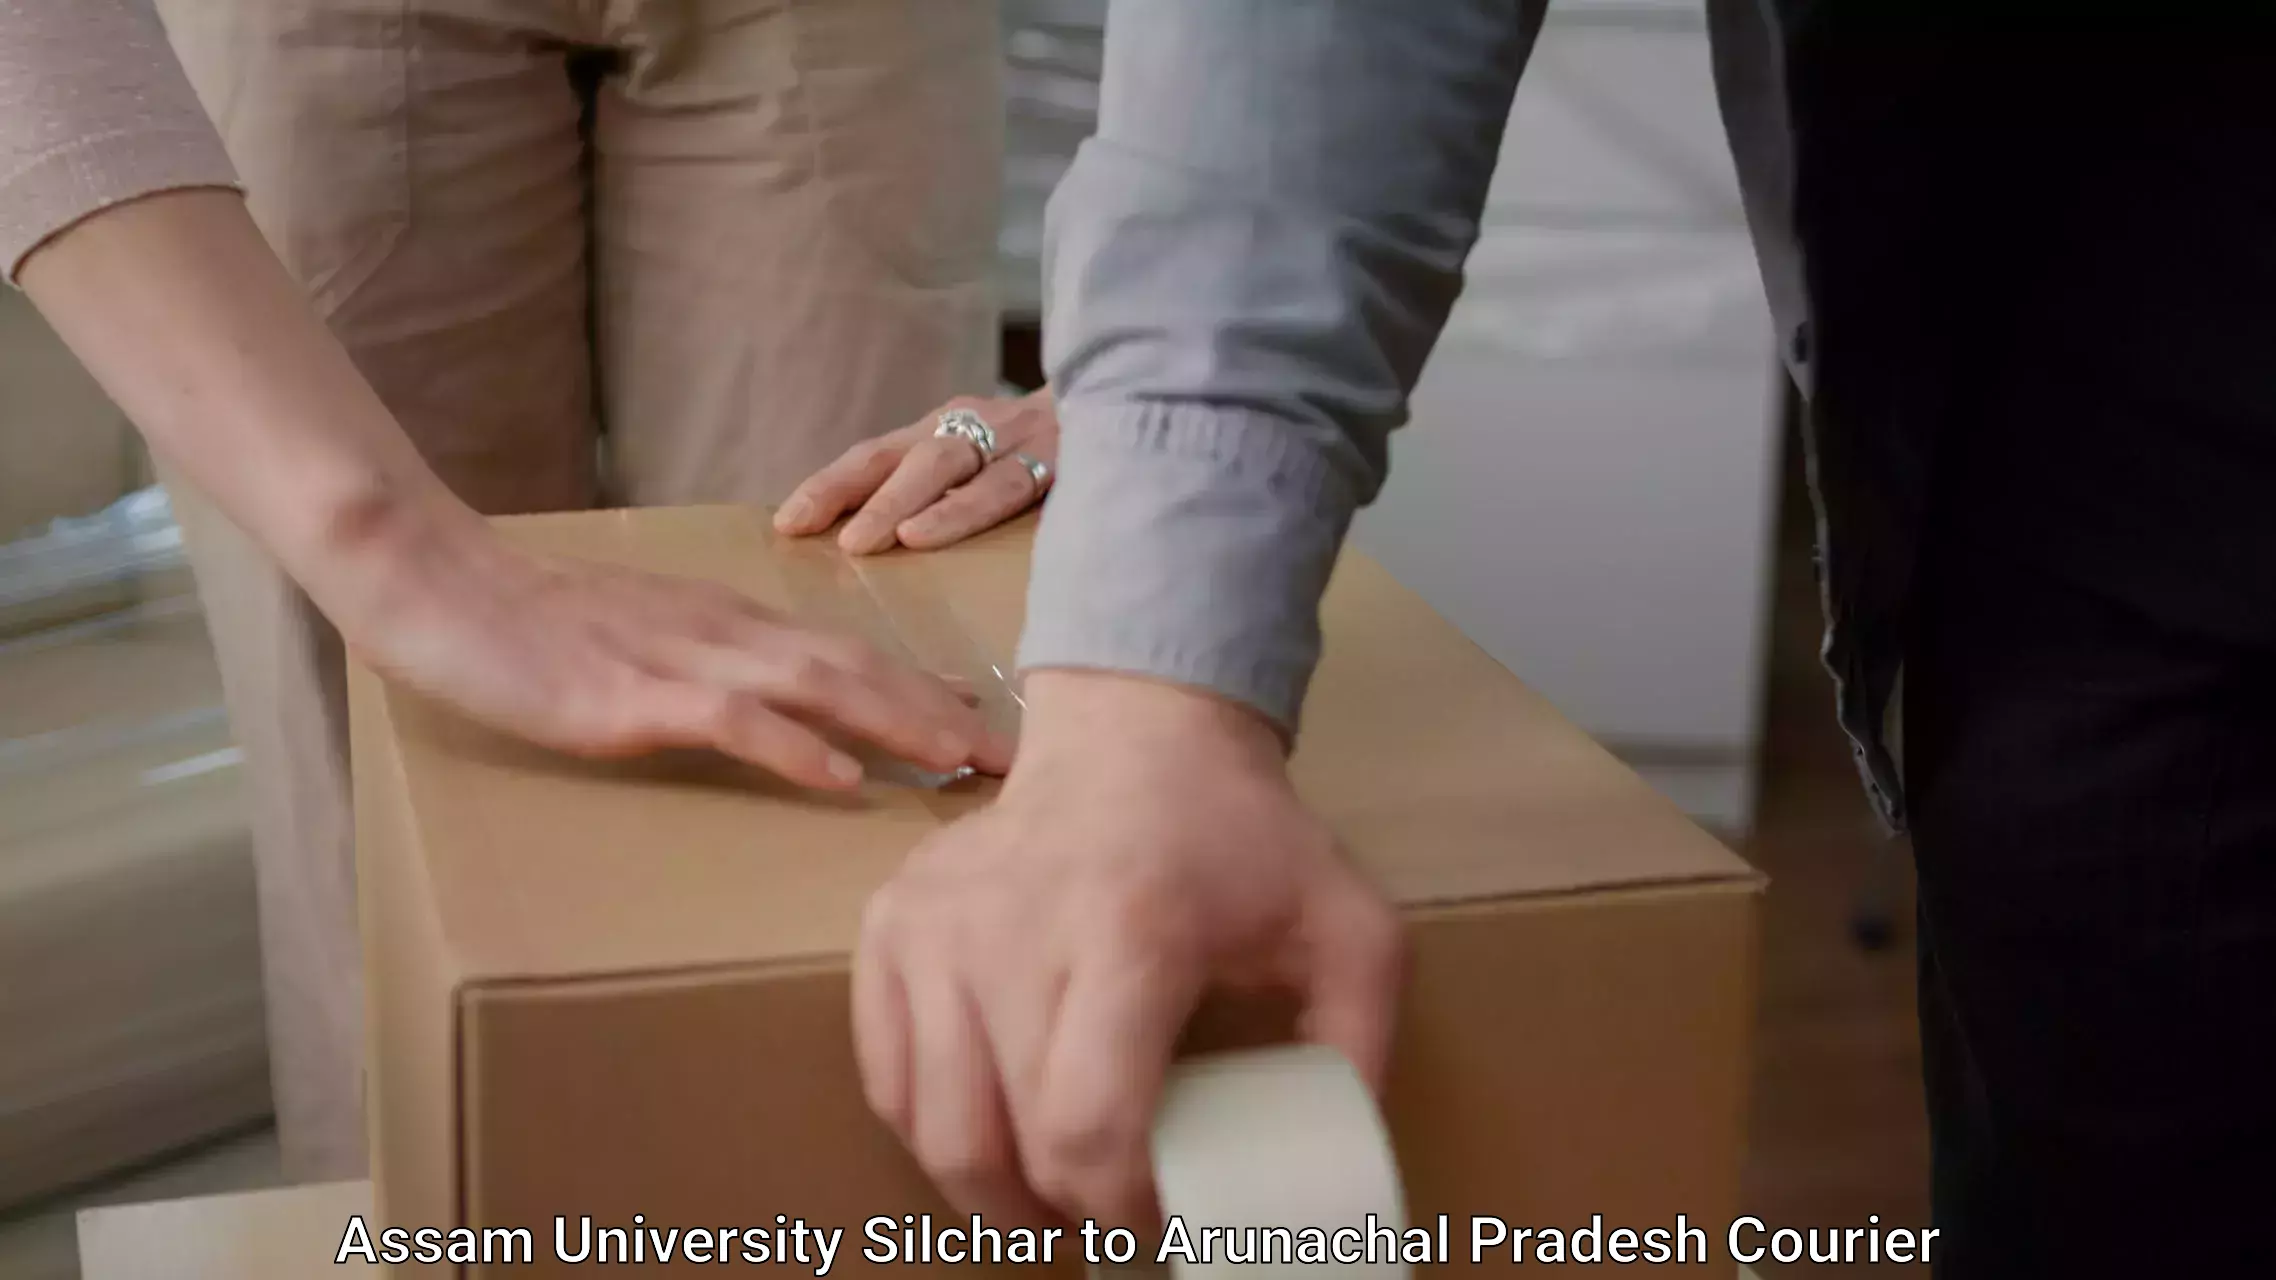 Expert packing and moving in Assam University Silchar to Lower Subansiri